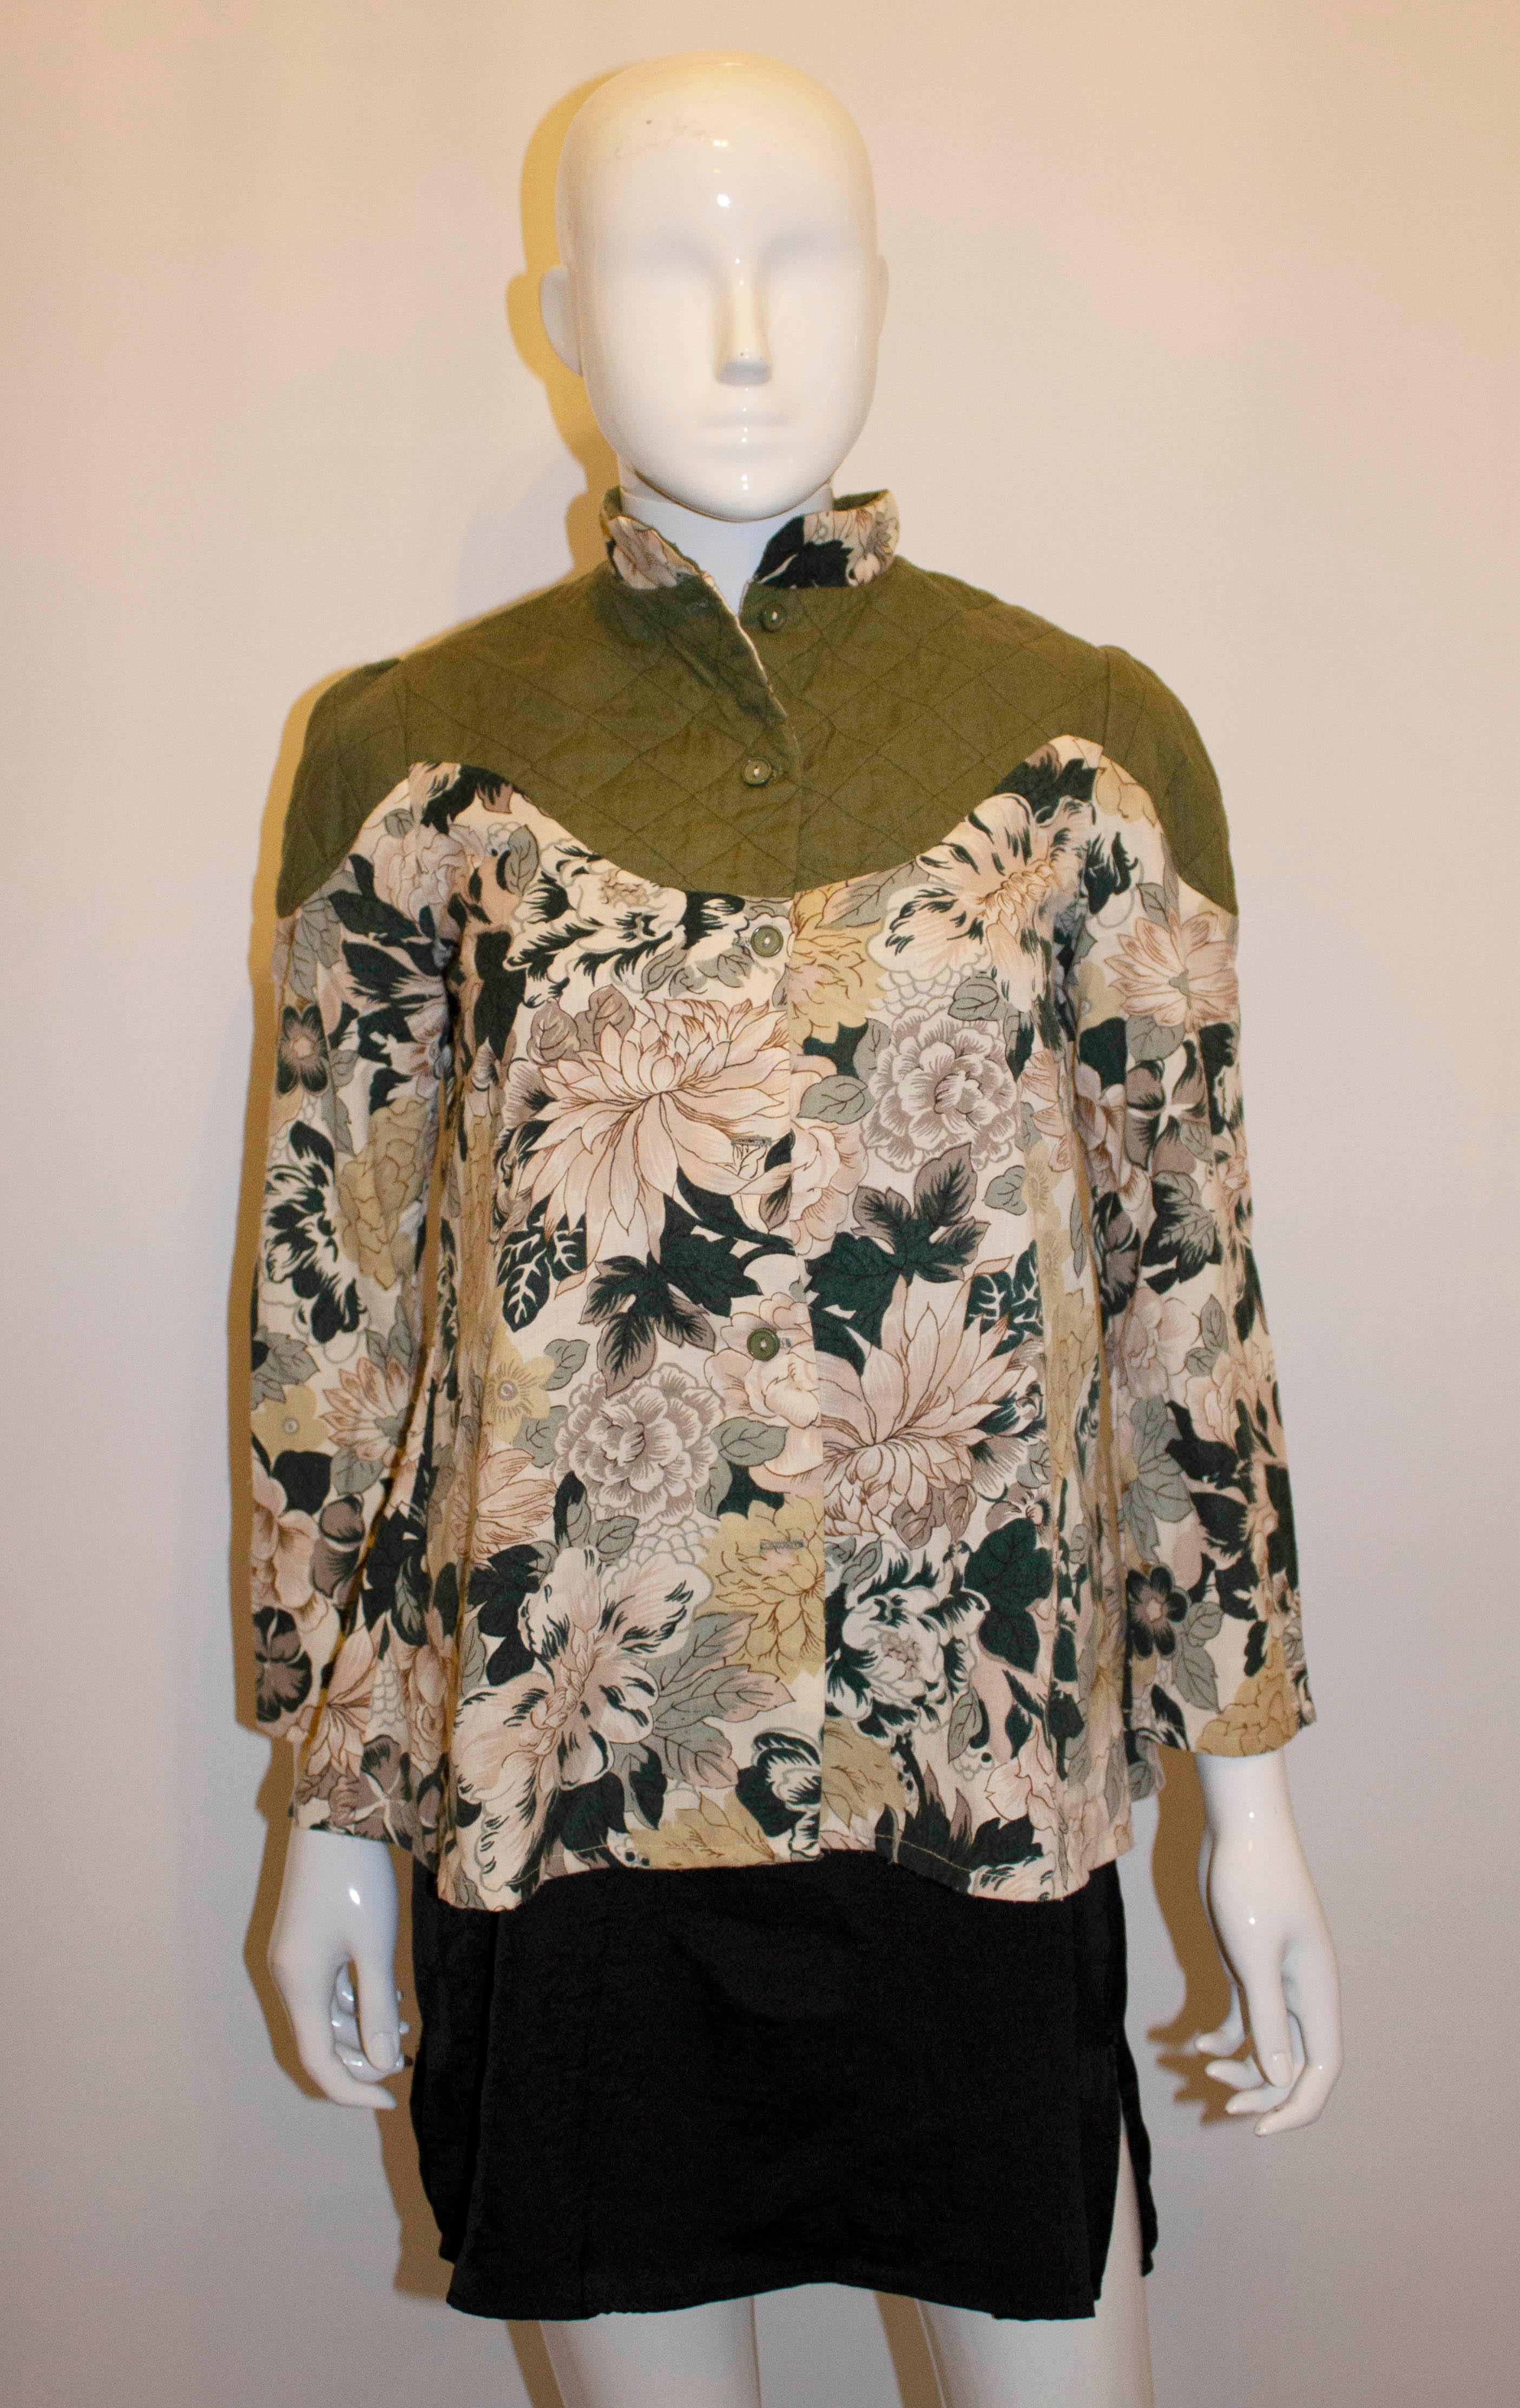 An unusual vintage top for Fall. The top has a sage green quilted top and yoke with a printed body and sleaves, It has a front button opening , stand up collar and is unlined. 